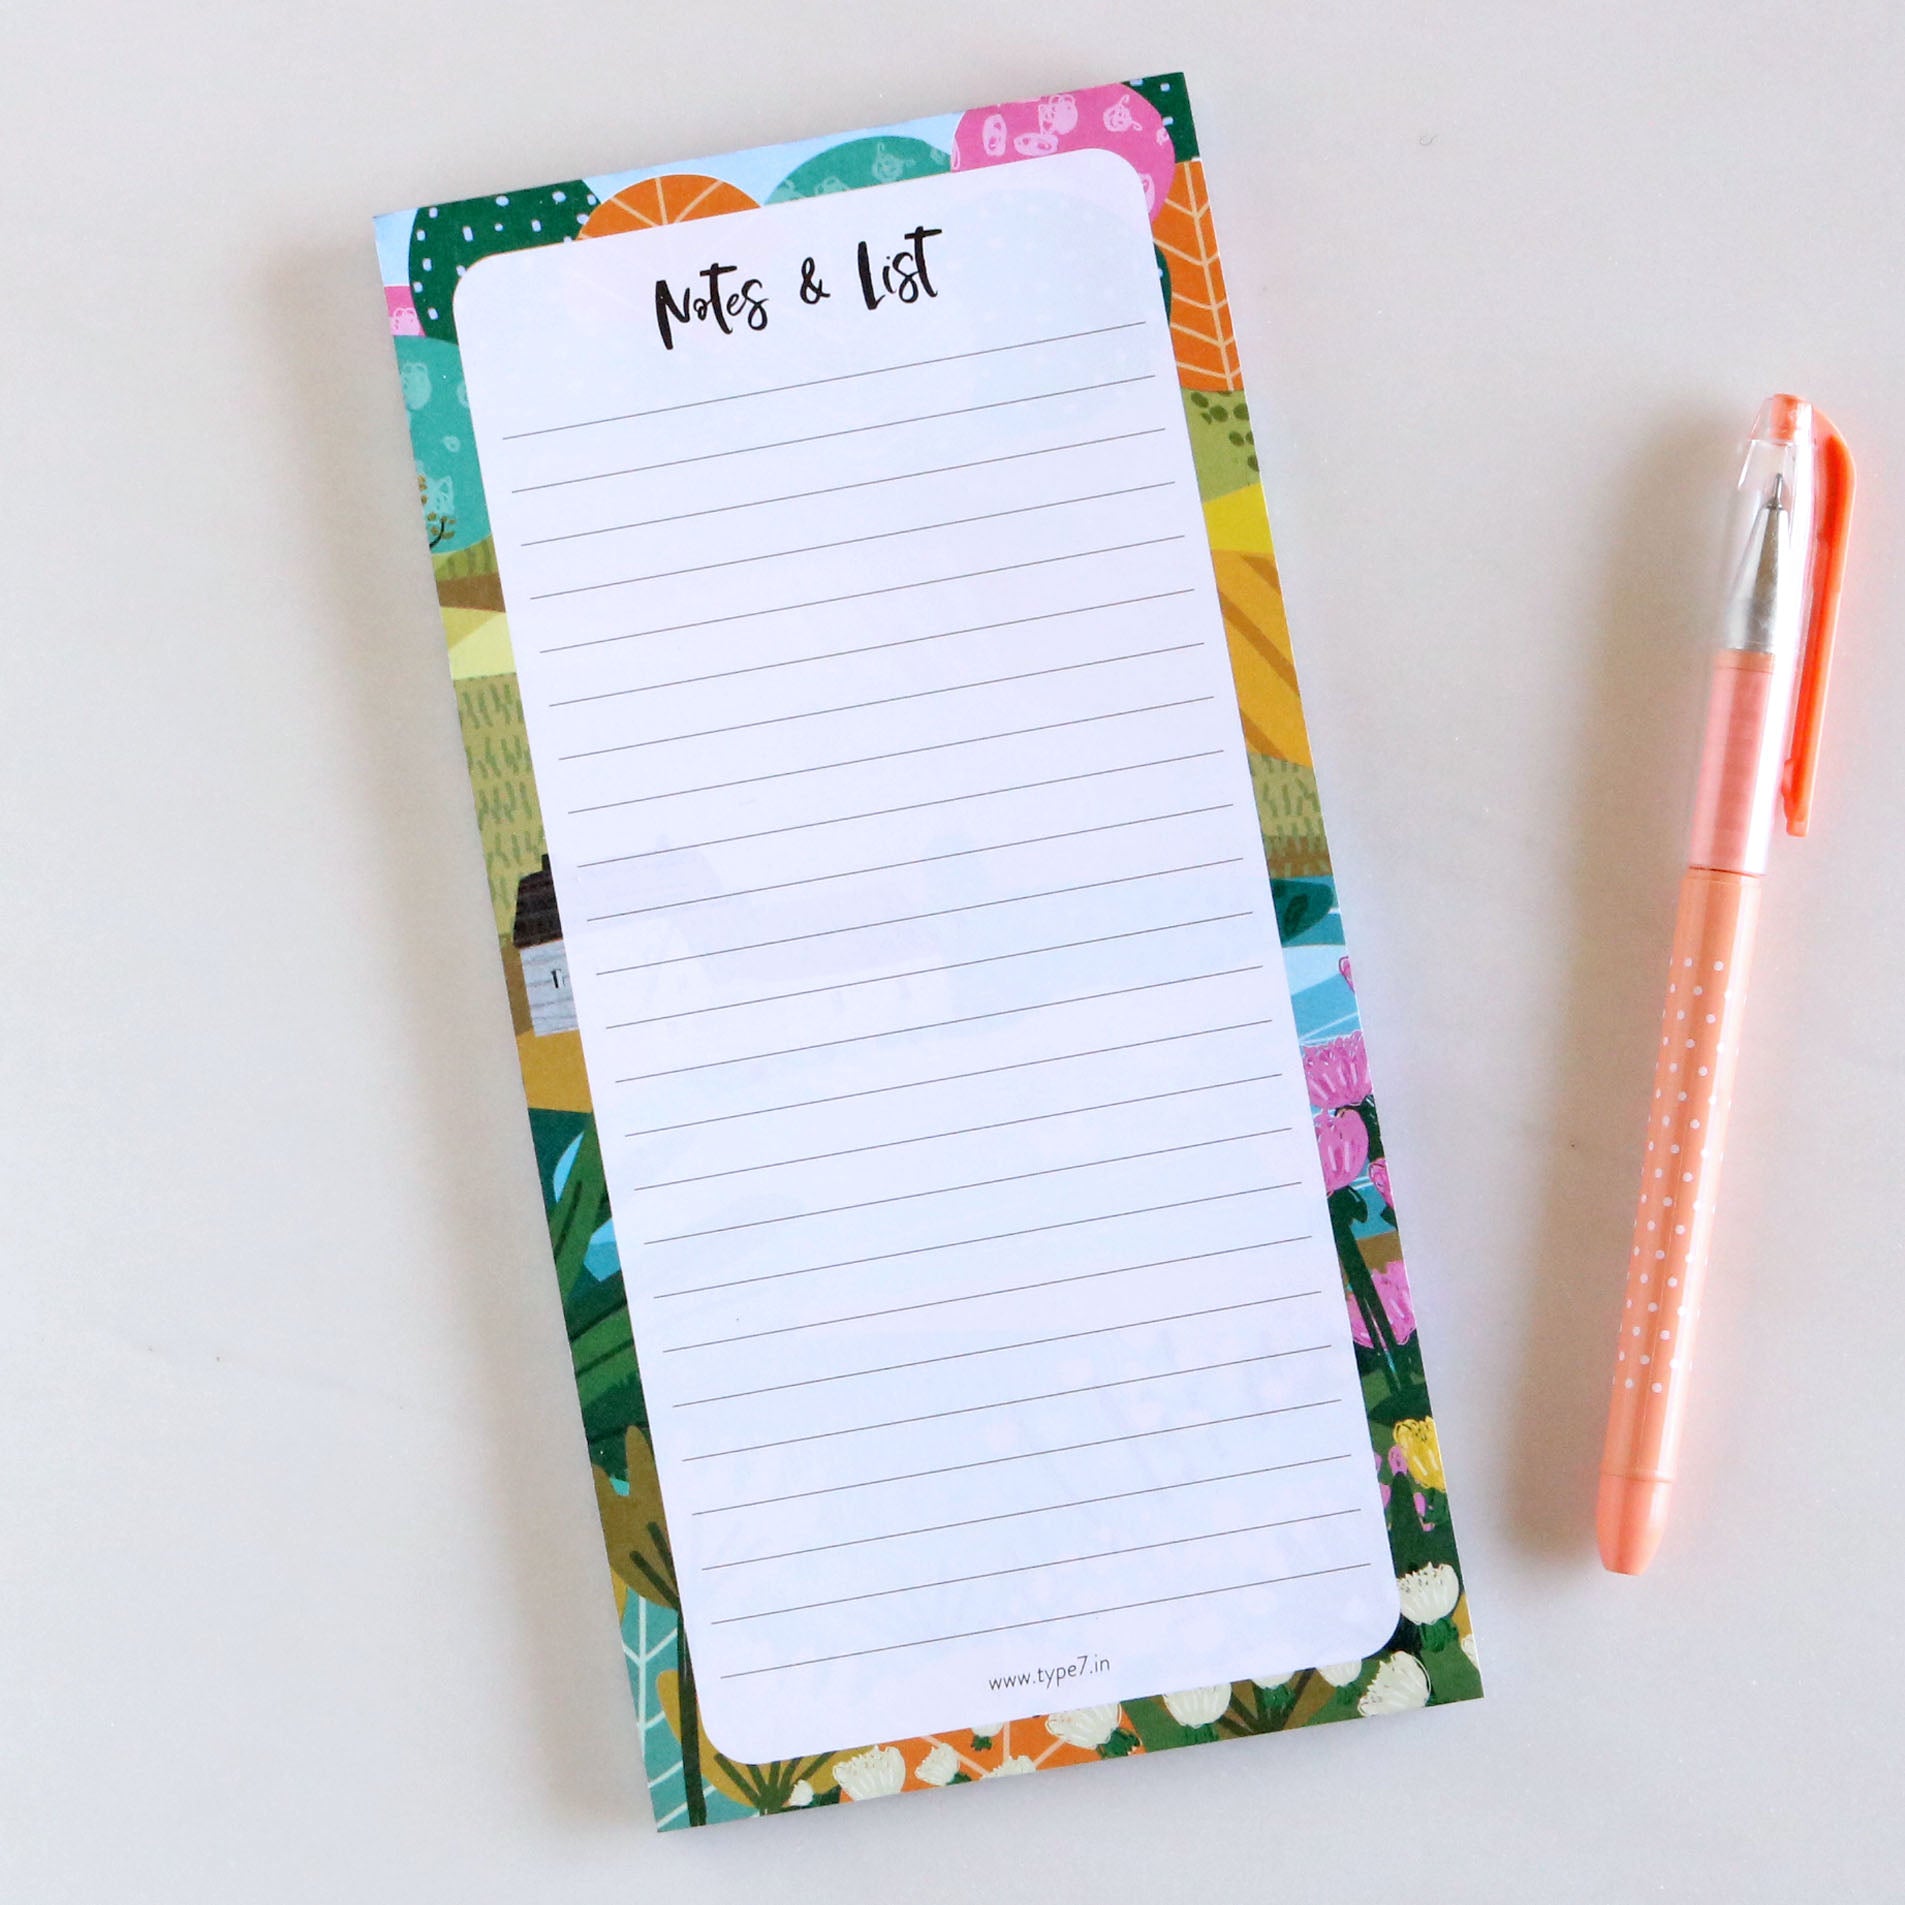 Set of 2 Notepads - Notes & List & Make Things Happen